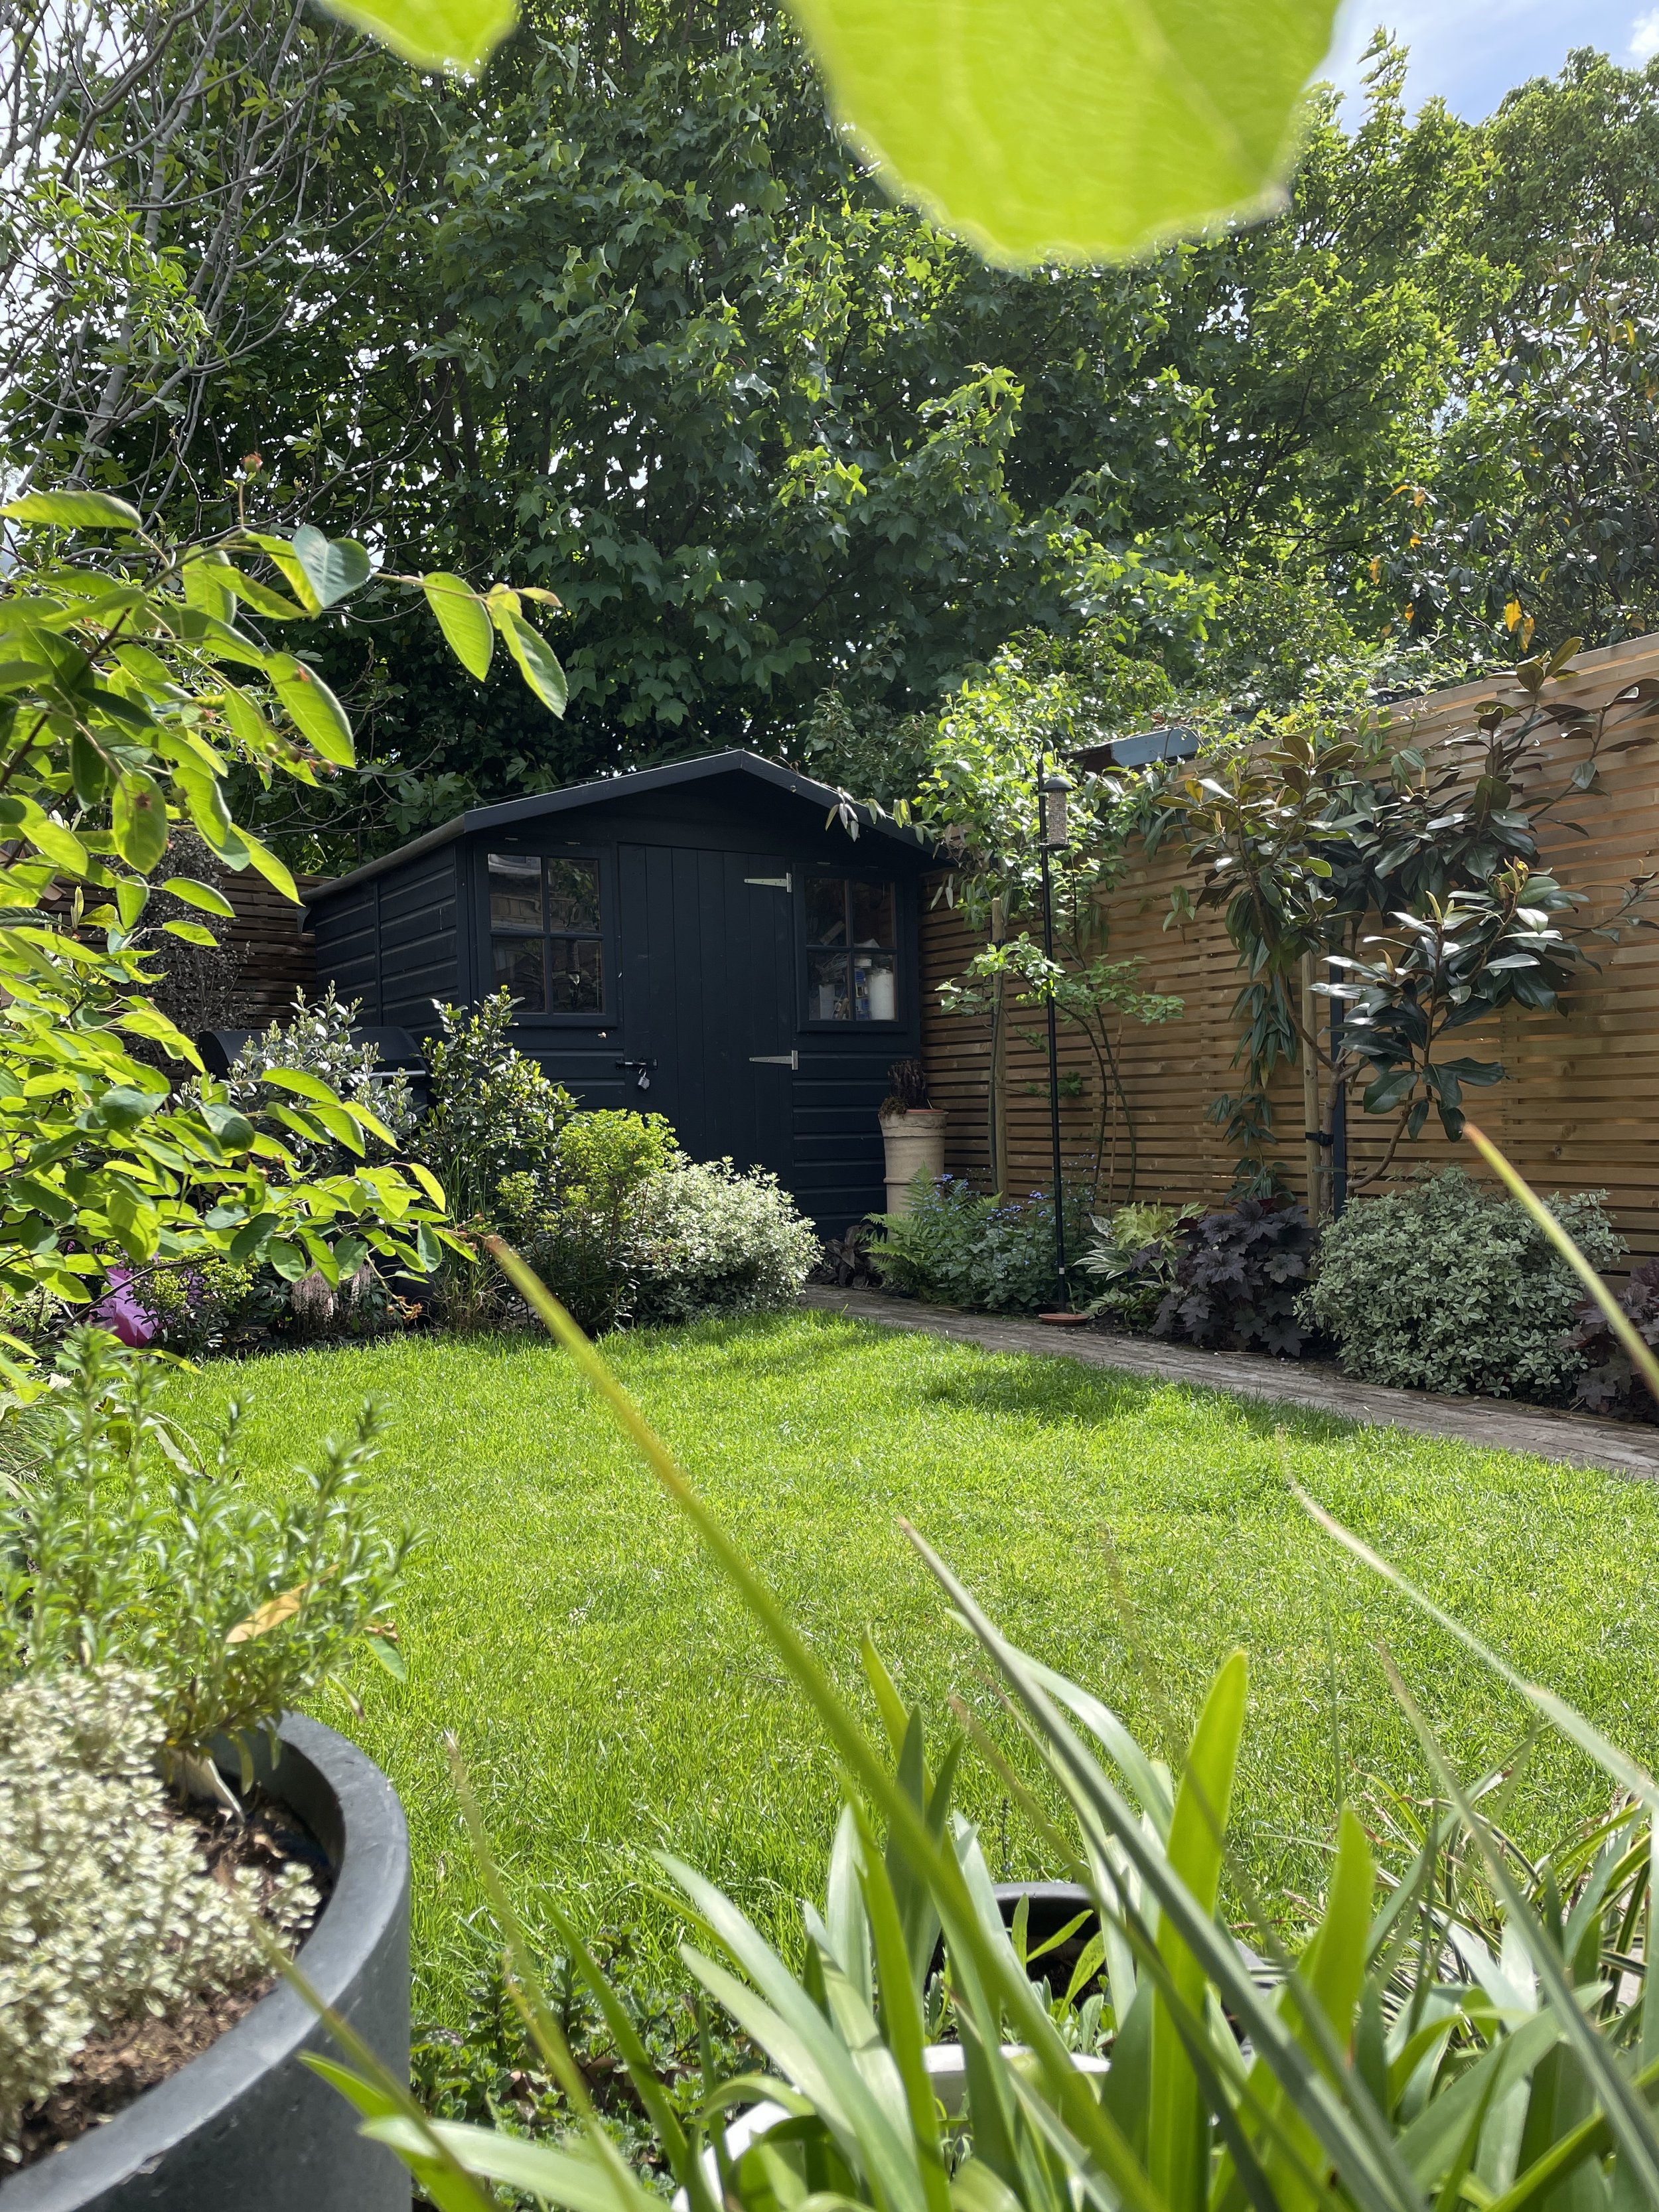 Small garden with lawn, beds and dark painted shed